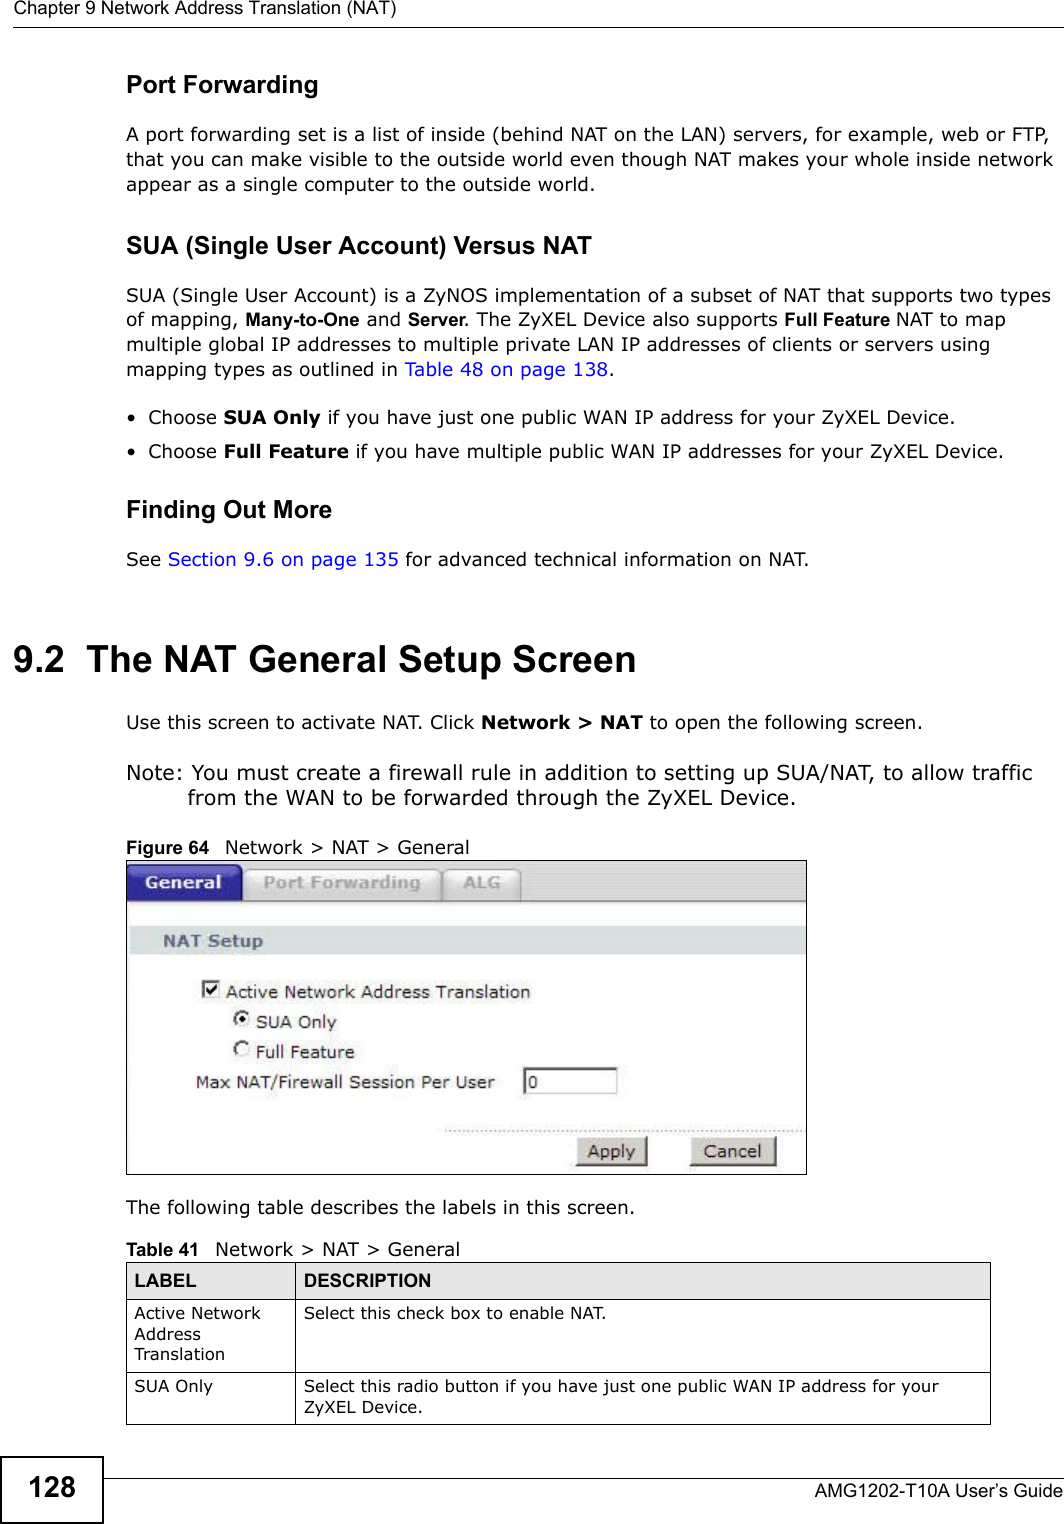 Chapter 9 Network Address Translation (NAT)AMG1202-T10A User’s Guide128Port ForwardingA port forwarding set is a list of inside (behind NAT on the LAN) servers, for example, web or FTP, that you can make visible to the outside world even though NAT makes your whole inside network appear as a single computer to the outside world.SUA (Single User Account) Versus NATSUA (Single User Account) is a ZyNOS implementation of a subset of NAT that supports two types of mapping, Many-to-One and Server. The ZyXEL Device also supports Full Feature NAT to map multiple global IP addresses to multiple private LAN IP addresses of clients or servers using mapping types as outlined in Table 48 on page 138. • Choose SUA Only if you have just one public WAN IP address for your ZyXEL Device.• Choose Full Feature if you have multiple public WAN IP addresses for your ZyXEL Device.Finding Out MoreSee Section 9.6 on page 135 for advanced technical information on NAT.9.2  The NAT General Setup ScreenUse this screen to activate NAT. Click Network &gt; NAT to open the following screen.Note: You must create a firewall rule in addition to setting up SUA/NAT, to allow traffic from the WAN to be forwarded through the ZyXEL Device.Figure 64   Network &gt; NAT &gt; GeneralThe following table describes the labels in this screen.Table 41   Network &gt; NAT &gt; GeneralLABEL DESCRIPTIONActive Network Address Translation Select this check box to enable NAT.SUA Only Select this radio button if you have just one public WAN IP address for your ZyXEL Device.